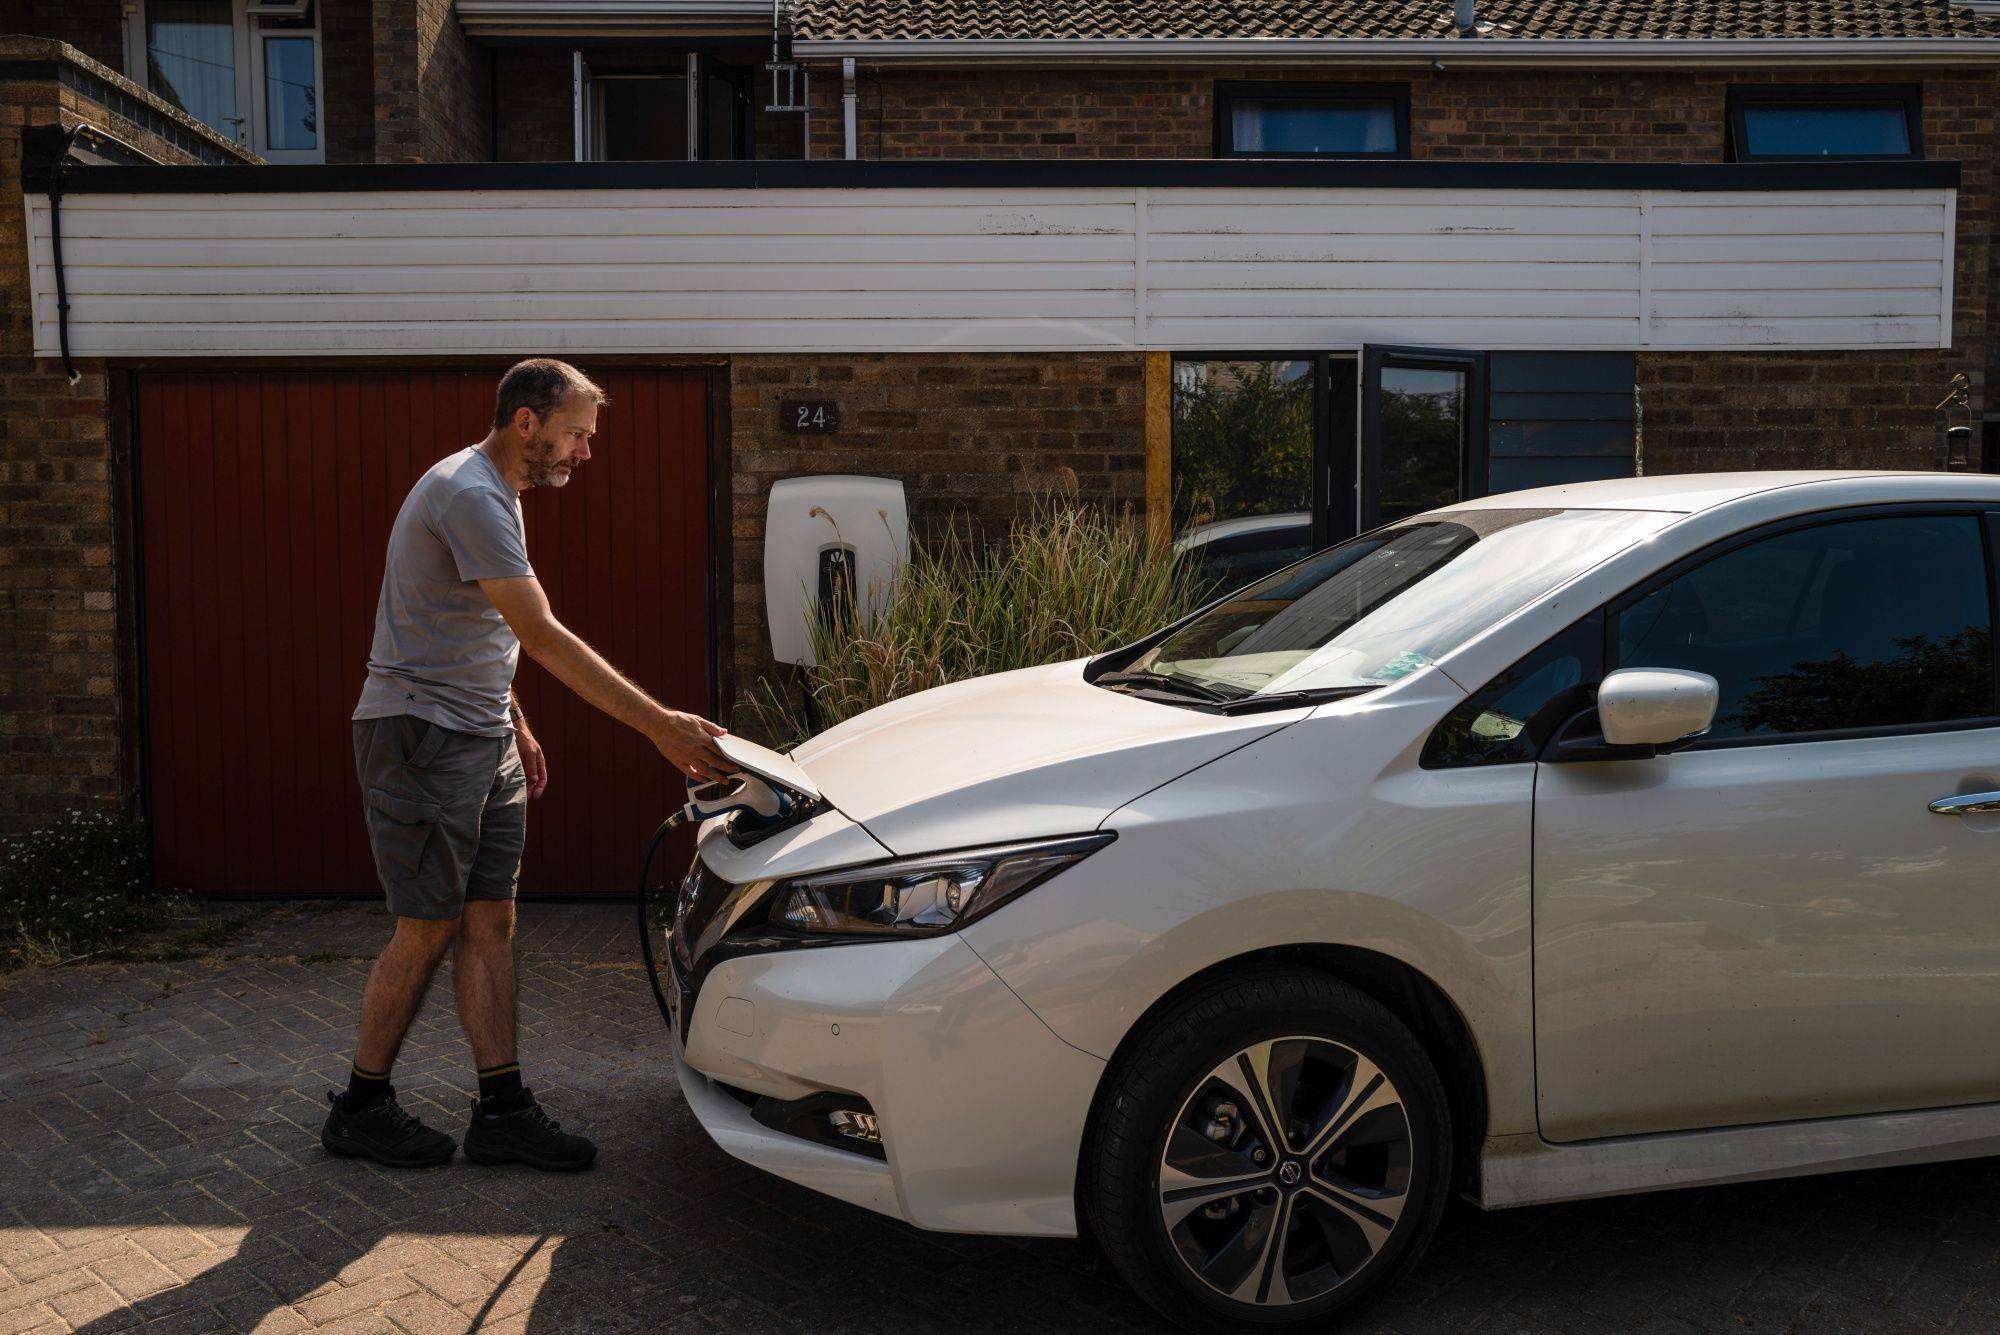 Paul Kershaw charges his a Nissan Leaf outside his home in Cambridge, England, on Aug. 15. | BLOOMBERG